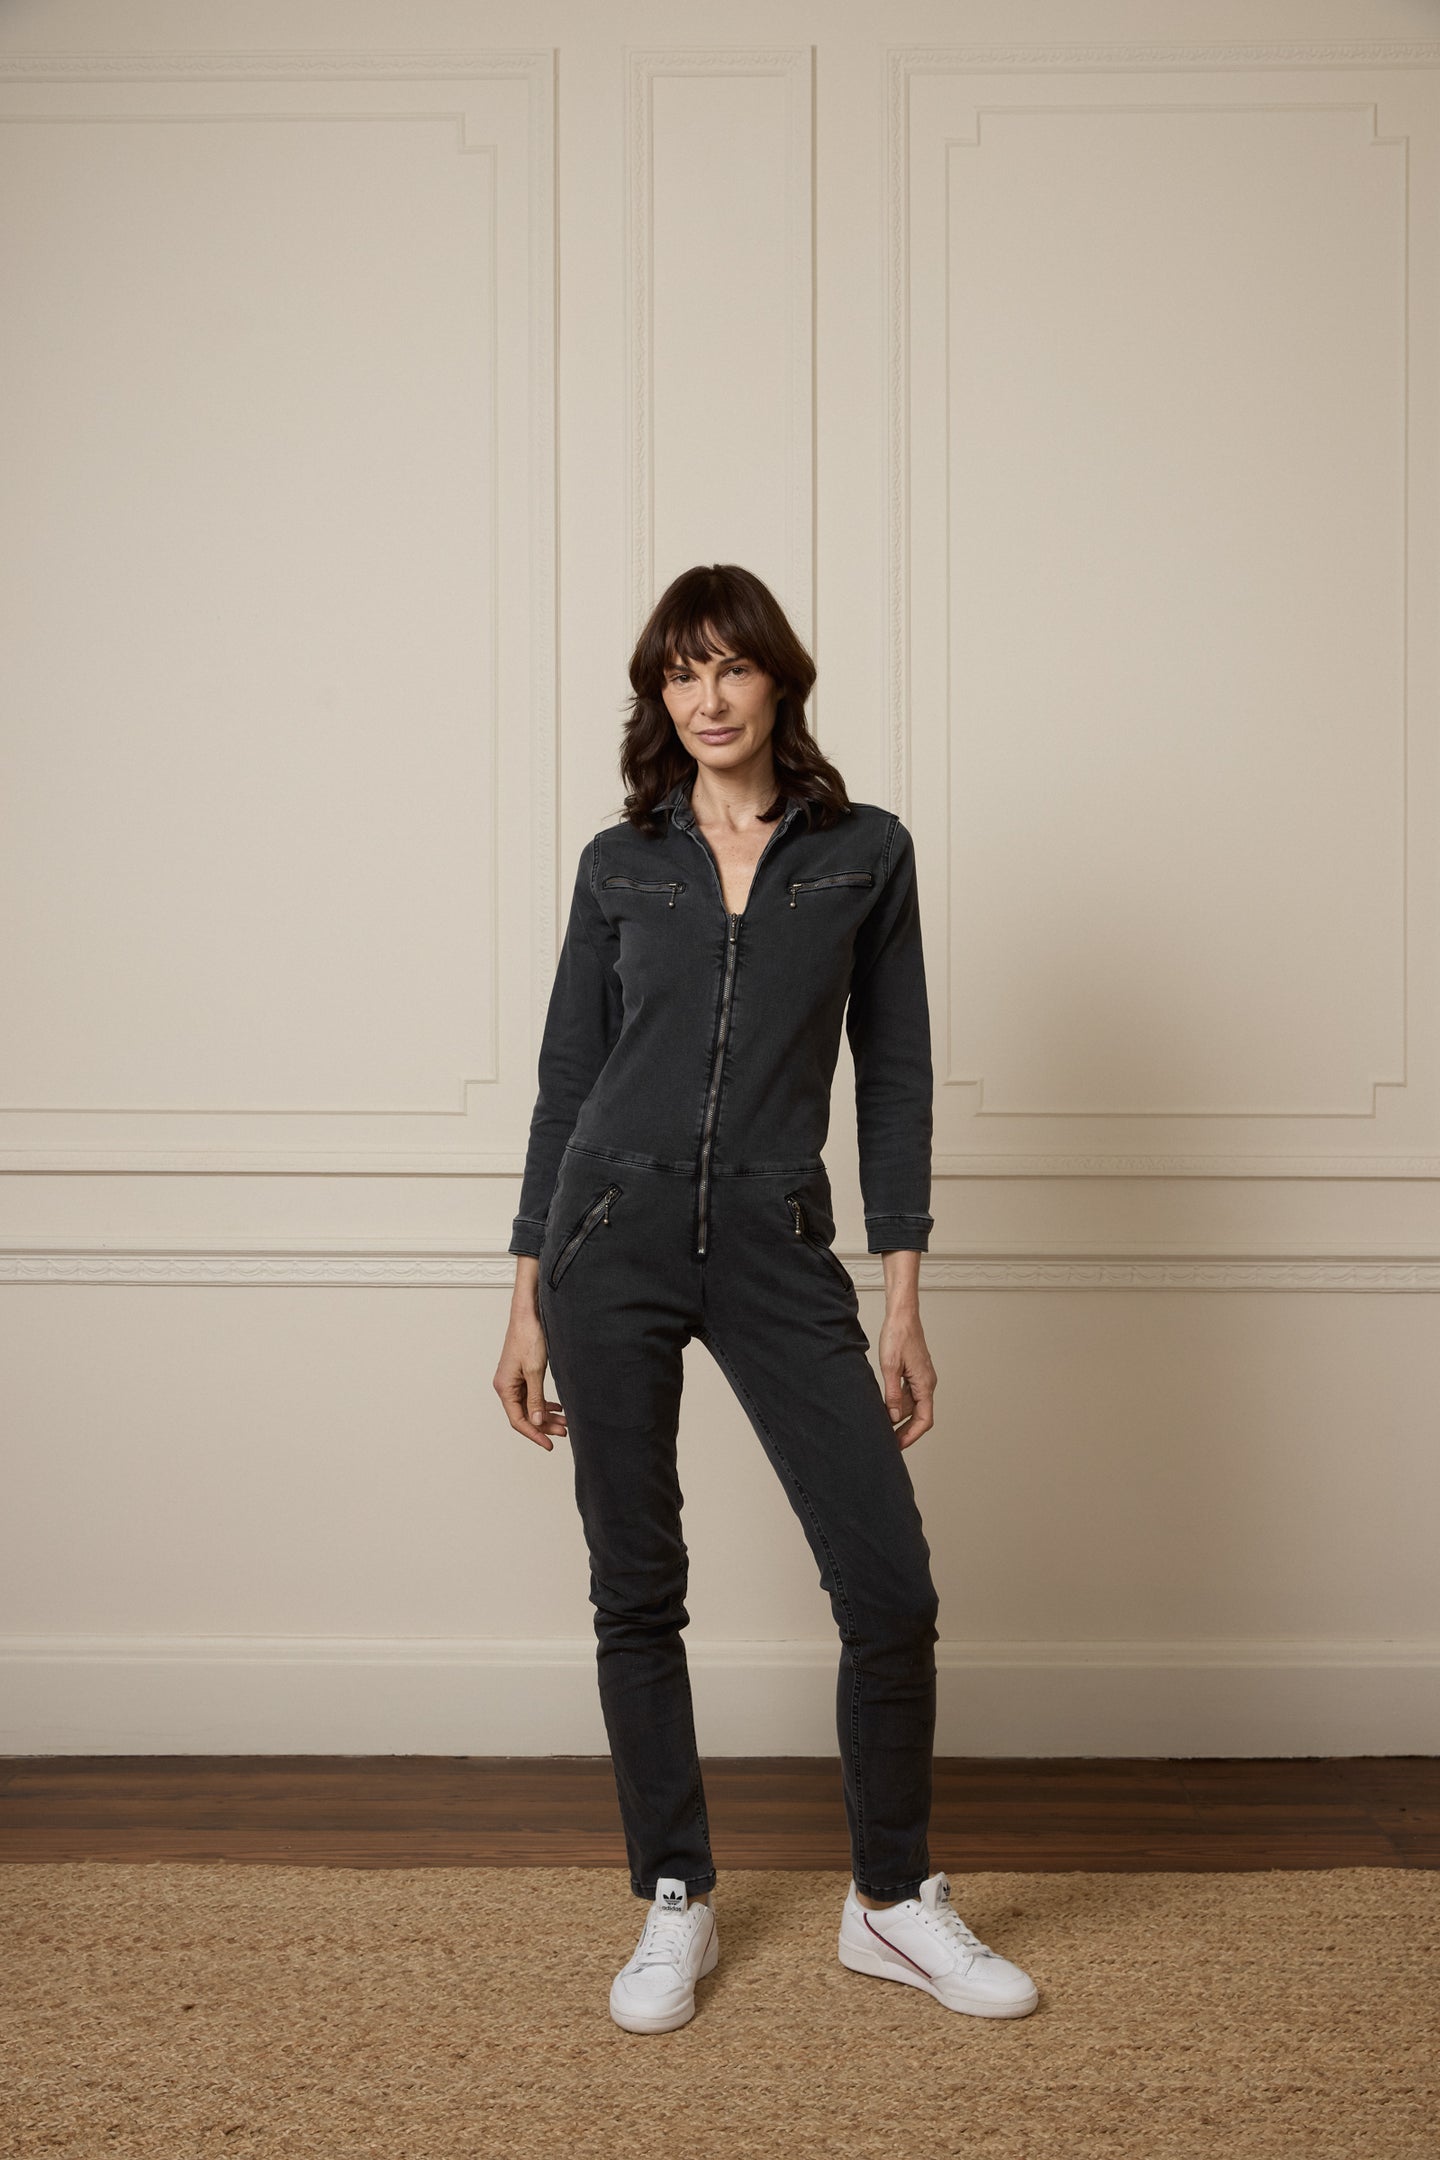    Dolly The Flight Suit - Noir Cord    You are the owner  No changes since you last viewed this file  Some collaborators need access to the file Share  	 flight suit organic denim charcoal grey zip up jumpsuit dolly